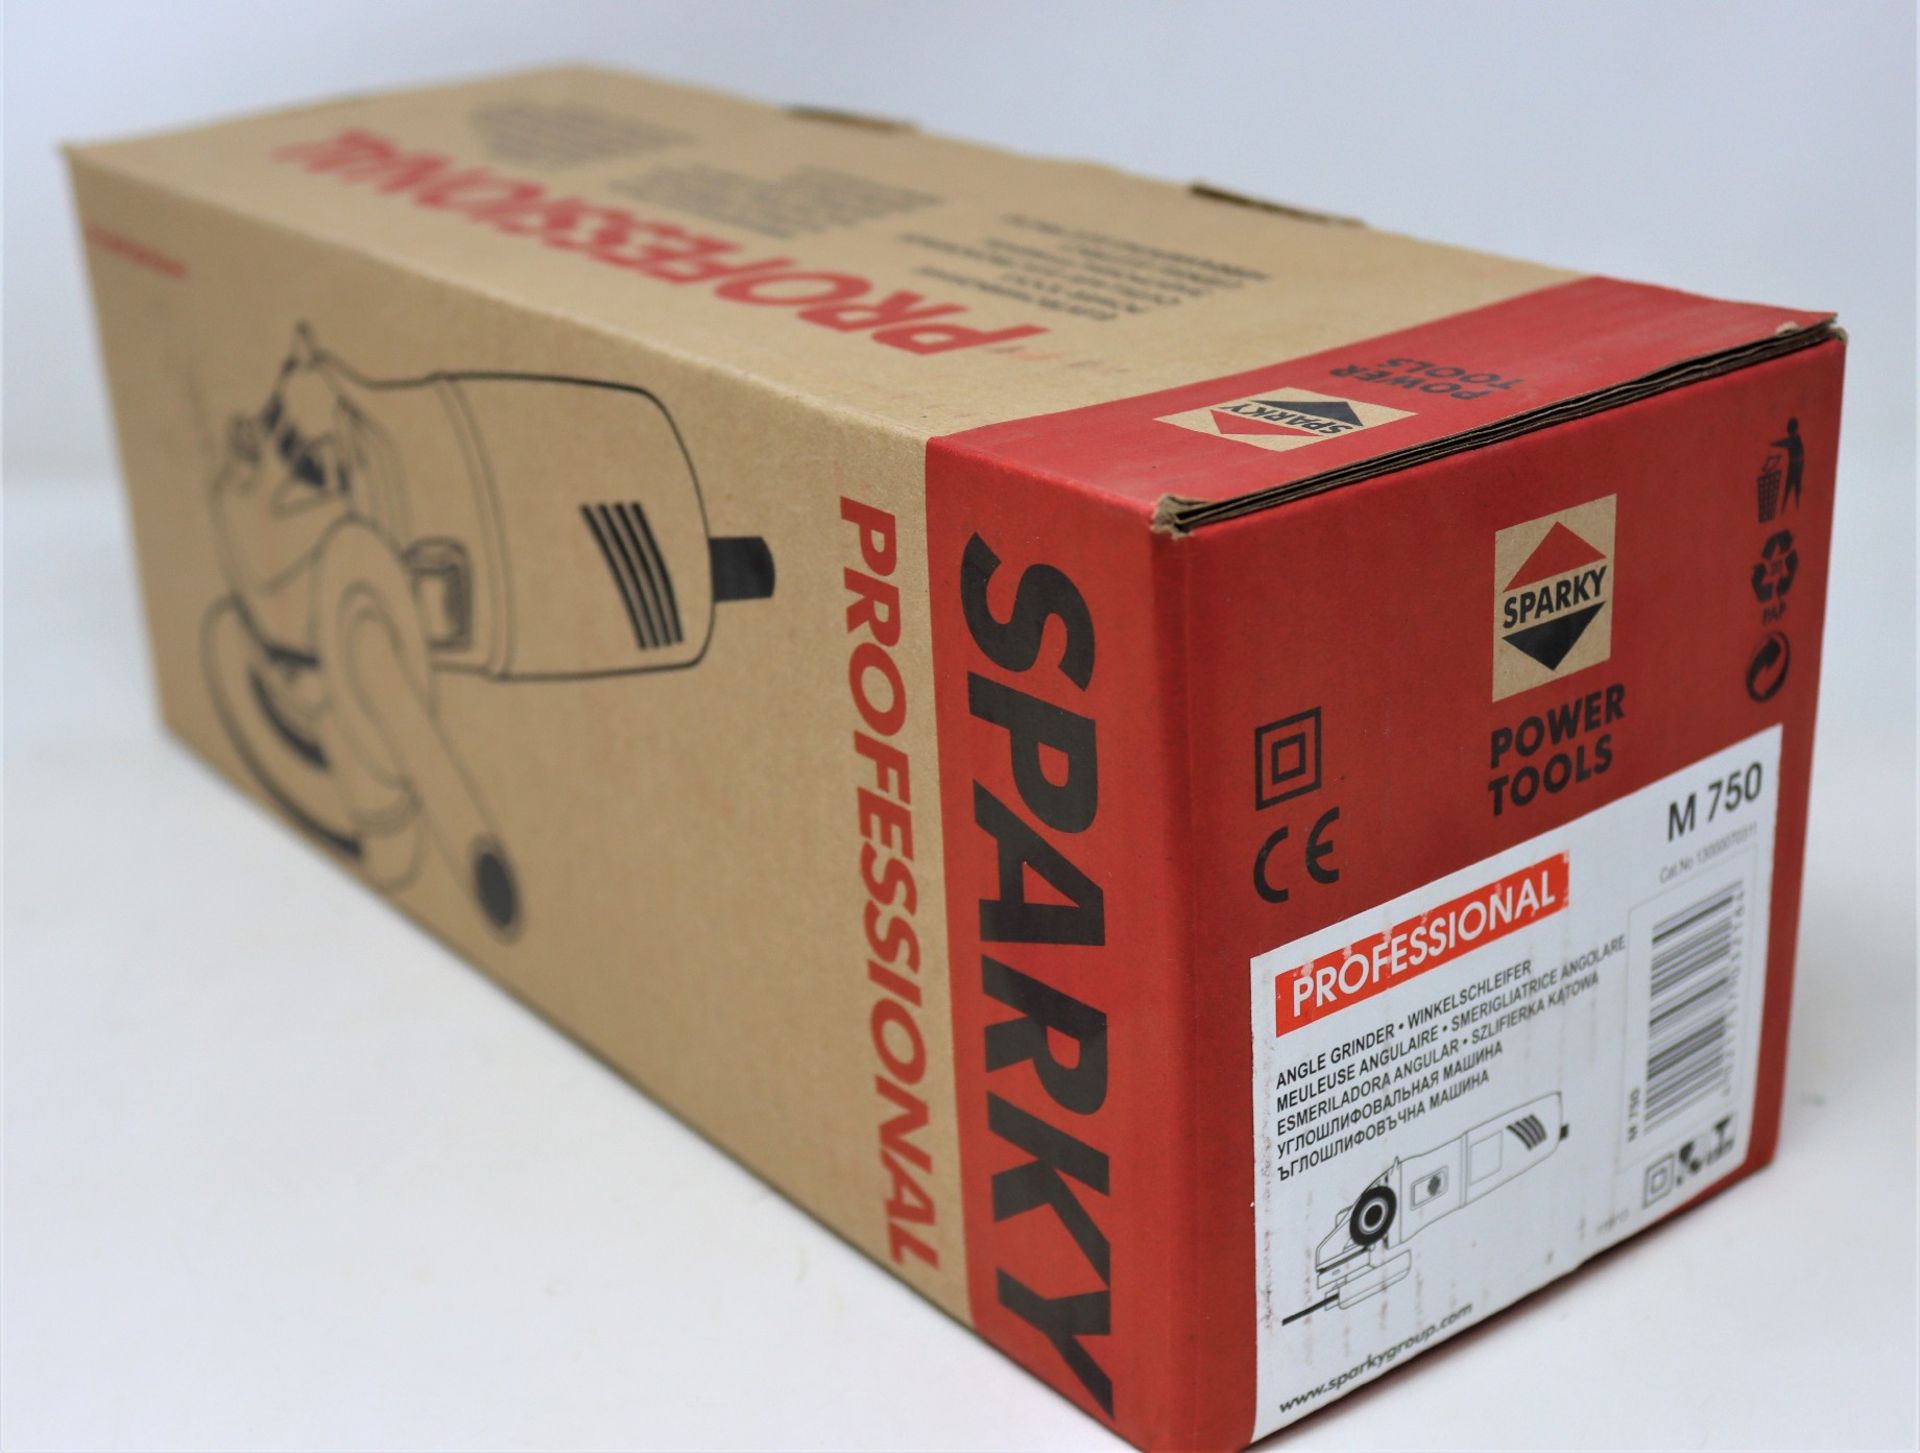 An as new Sparky professional angle grinder (M750).